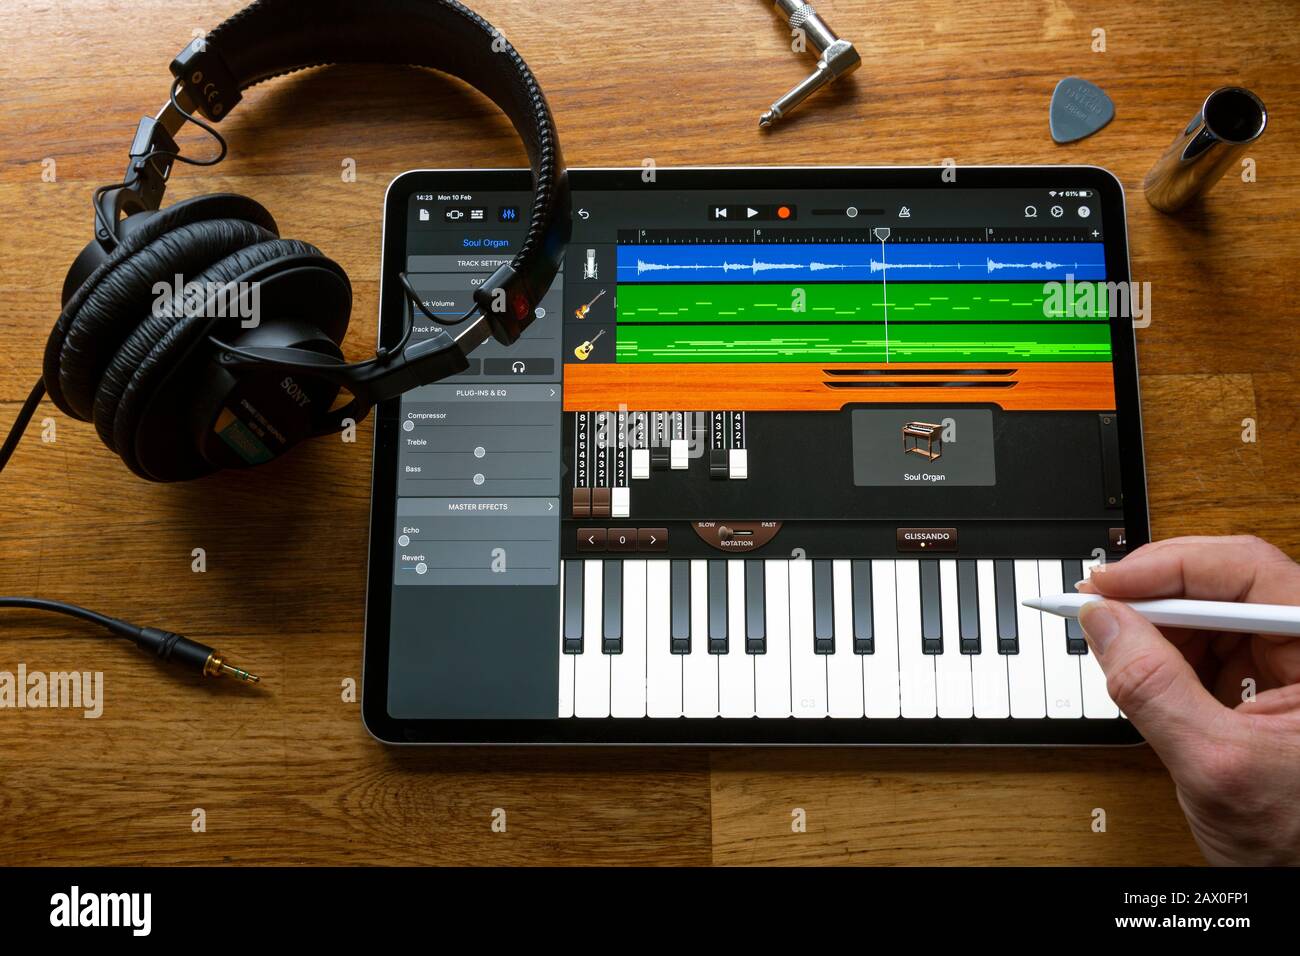 BATH, UK - FEBRUARY 10, 2020: GarageBand music making application being used to compose a song on an Apple iPad Pro in a home environment. Stock Photo